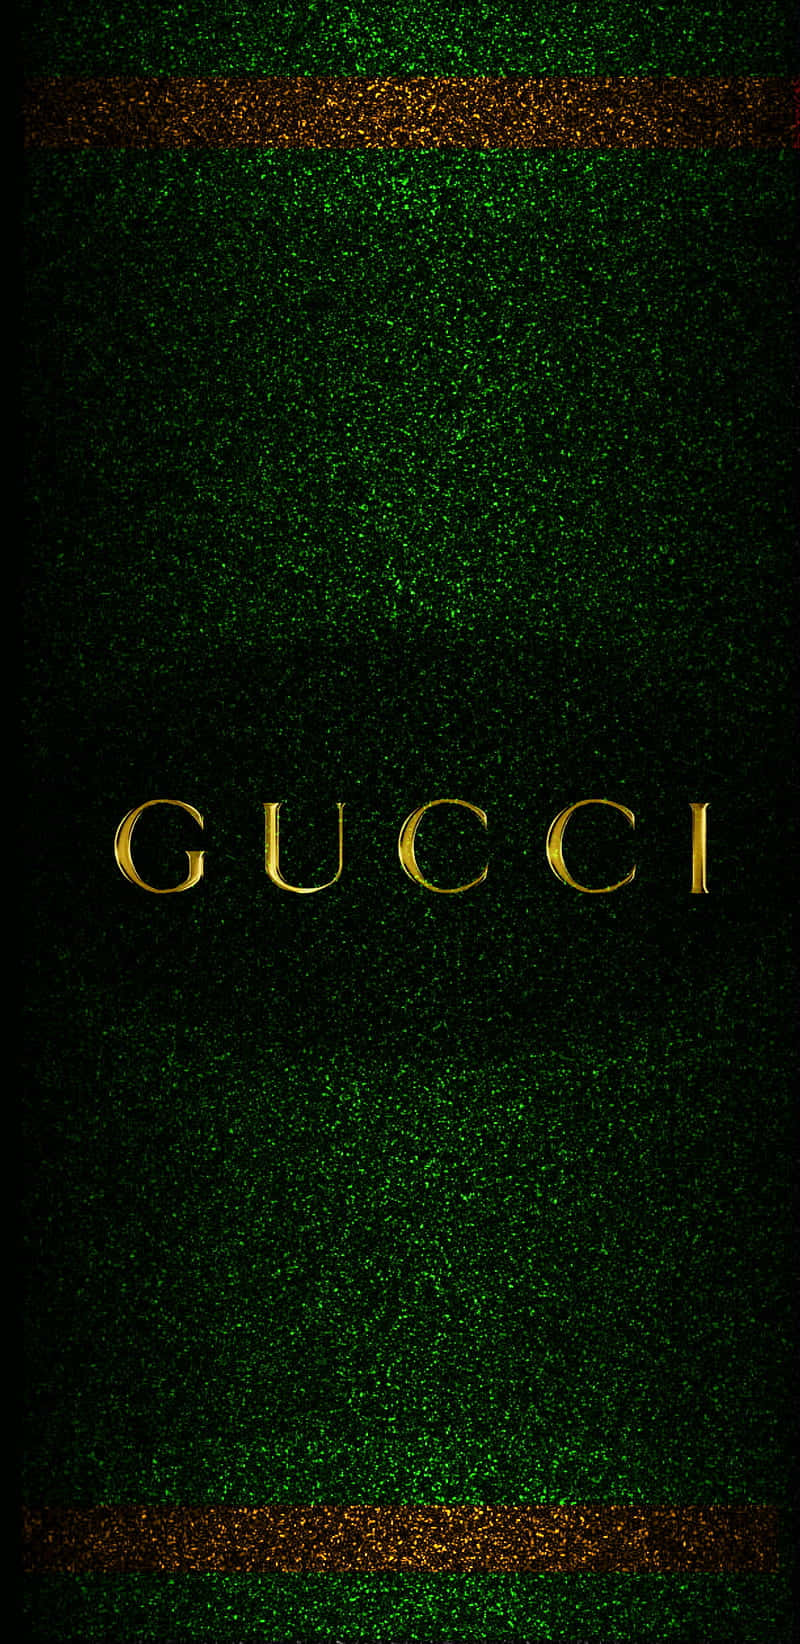 Look fashionable in this vibrant green Gucci design Wallpaper